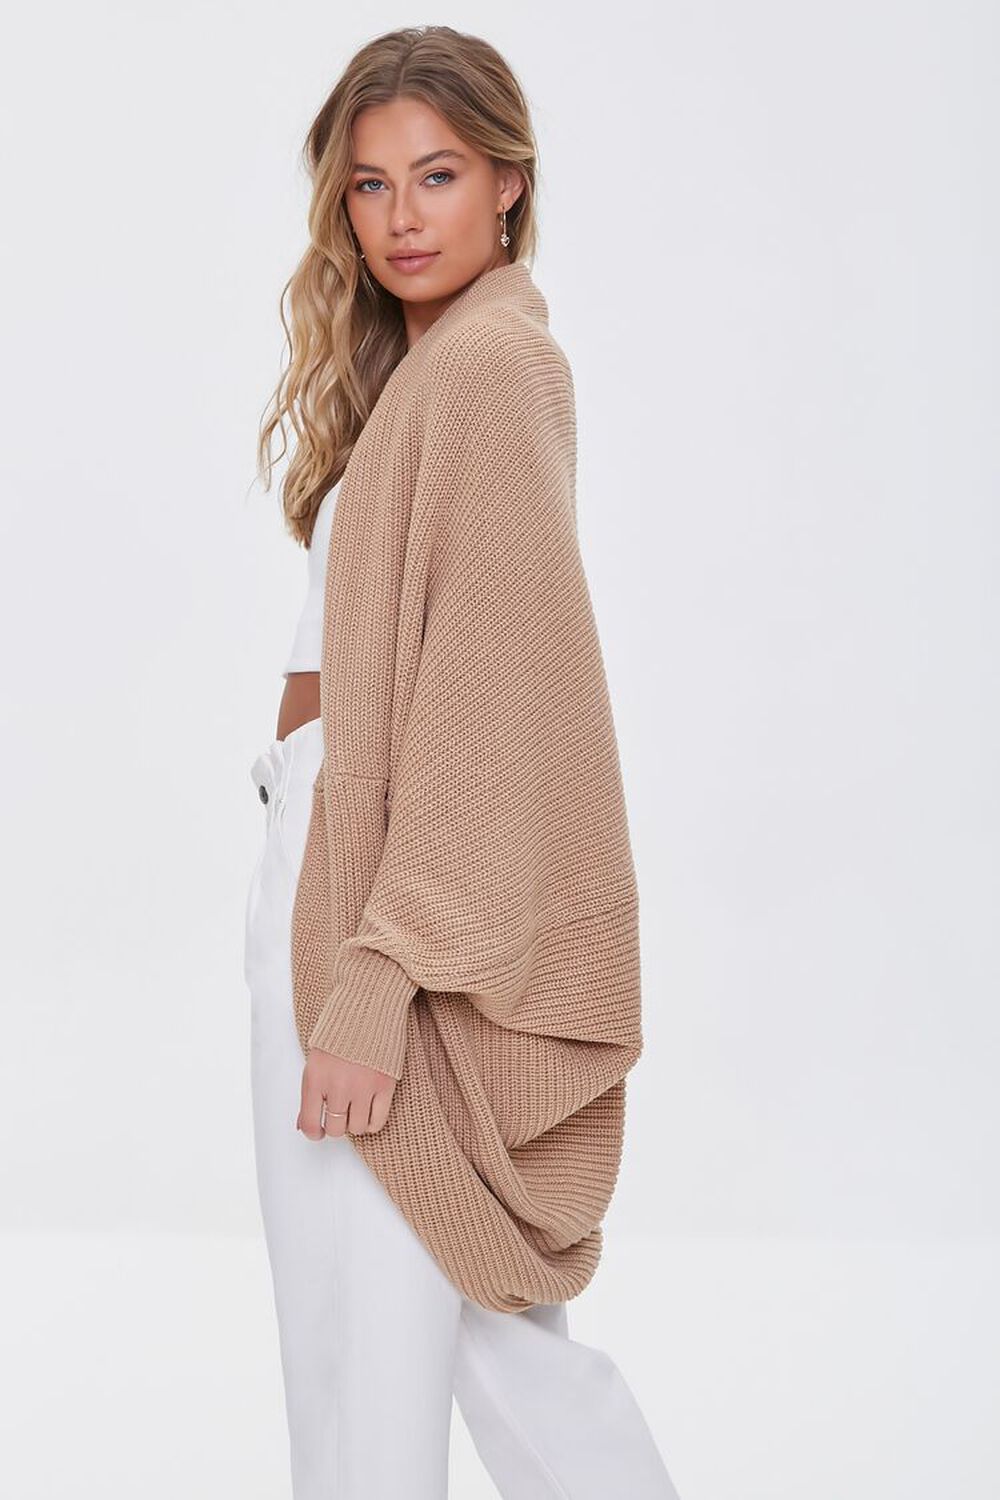 TAUPE Ribbed Open-Front Cardigan Sweater, image 2